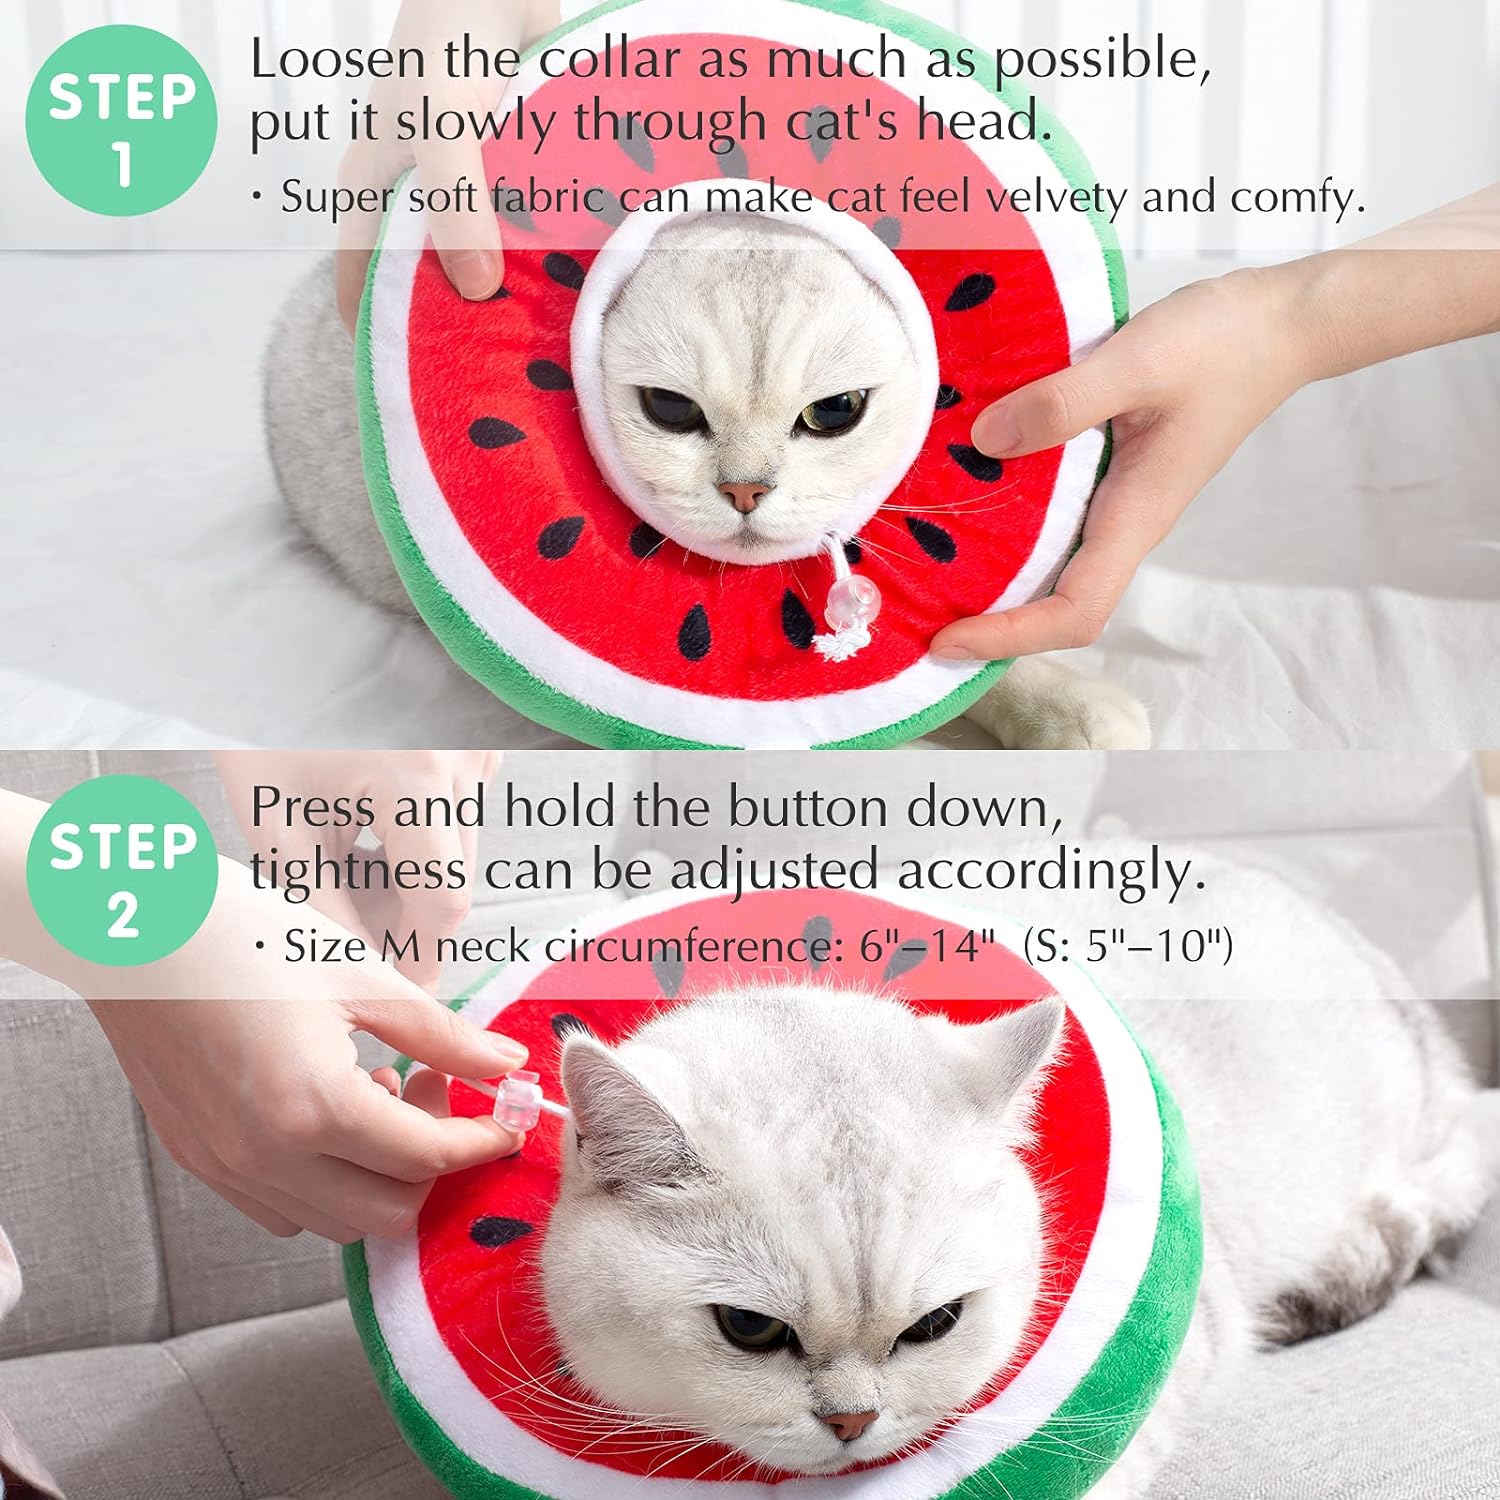 KUTKUT Adjustable Kitten Cone Collar Soft, Adjustable Recovery E Collar, Cat Cones After Surgery for Kittens and Small Cats Neck Cone to Prevent Licking Biting After Surgery Protect Wounds - 